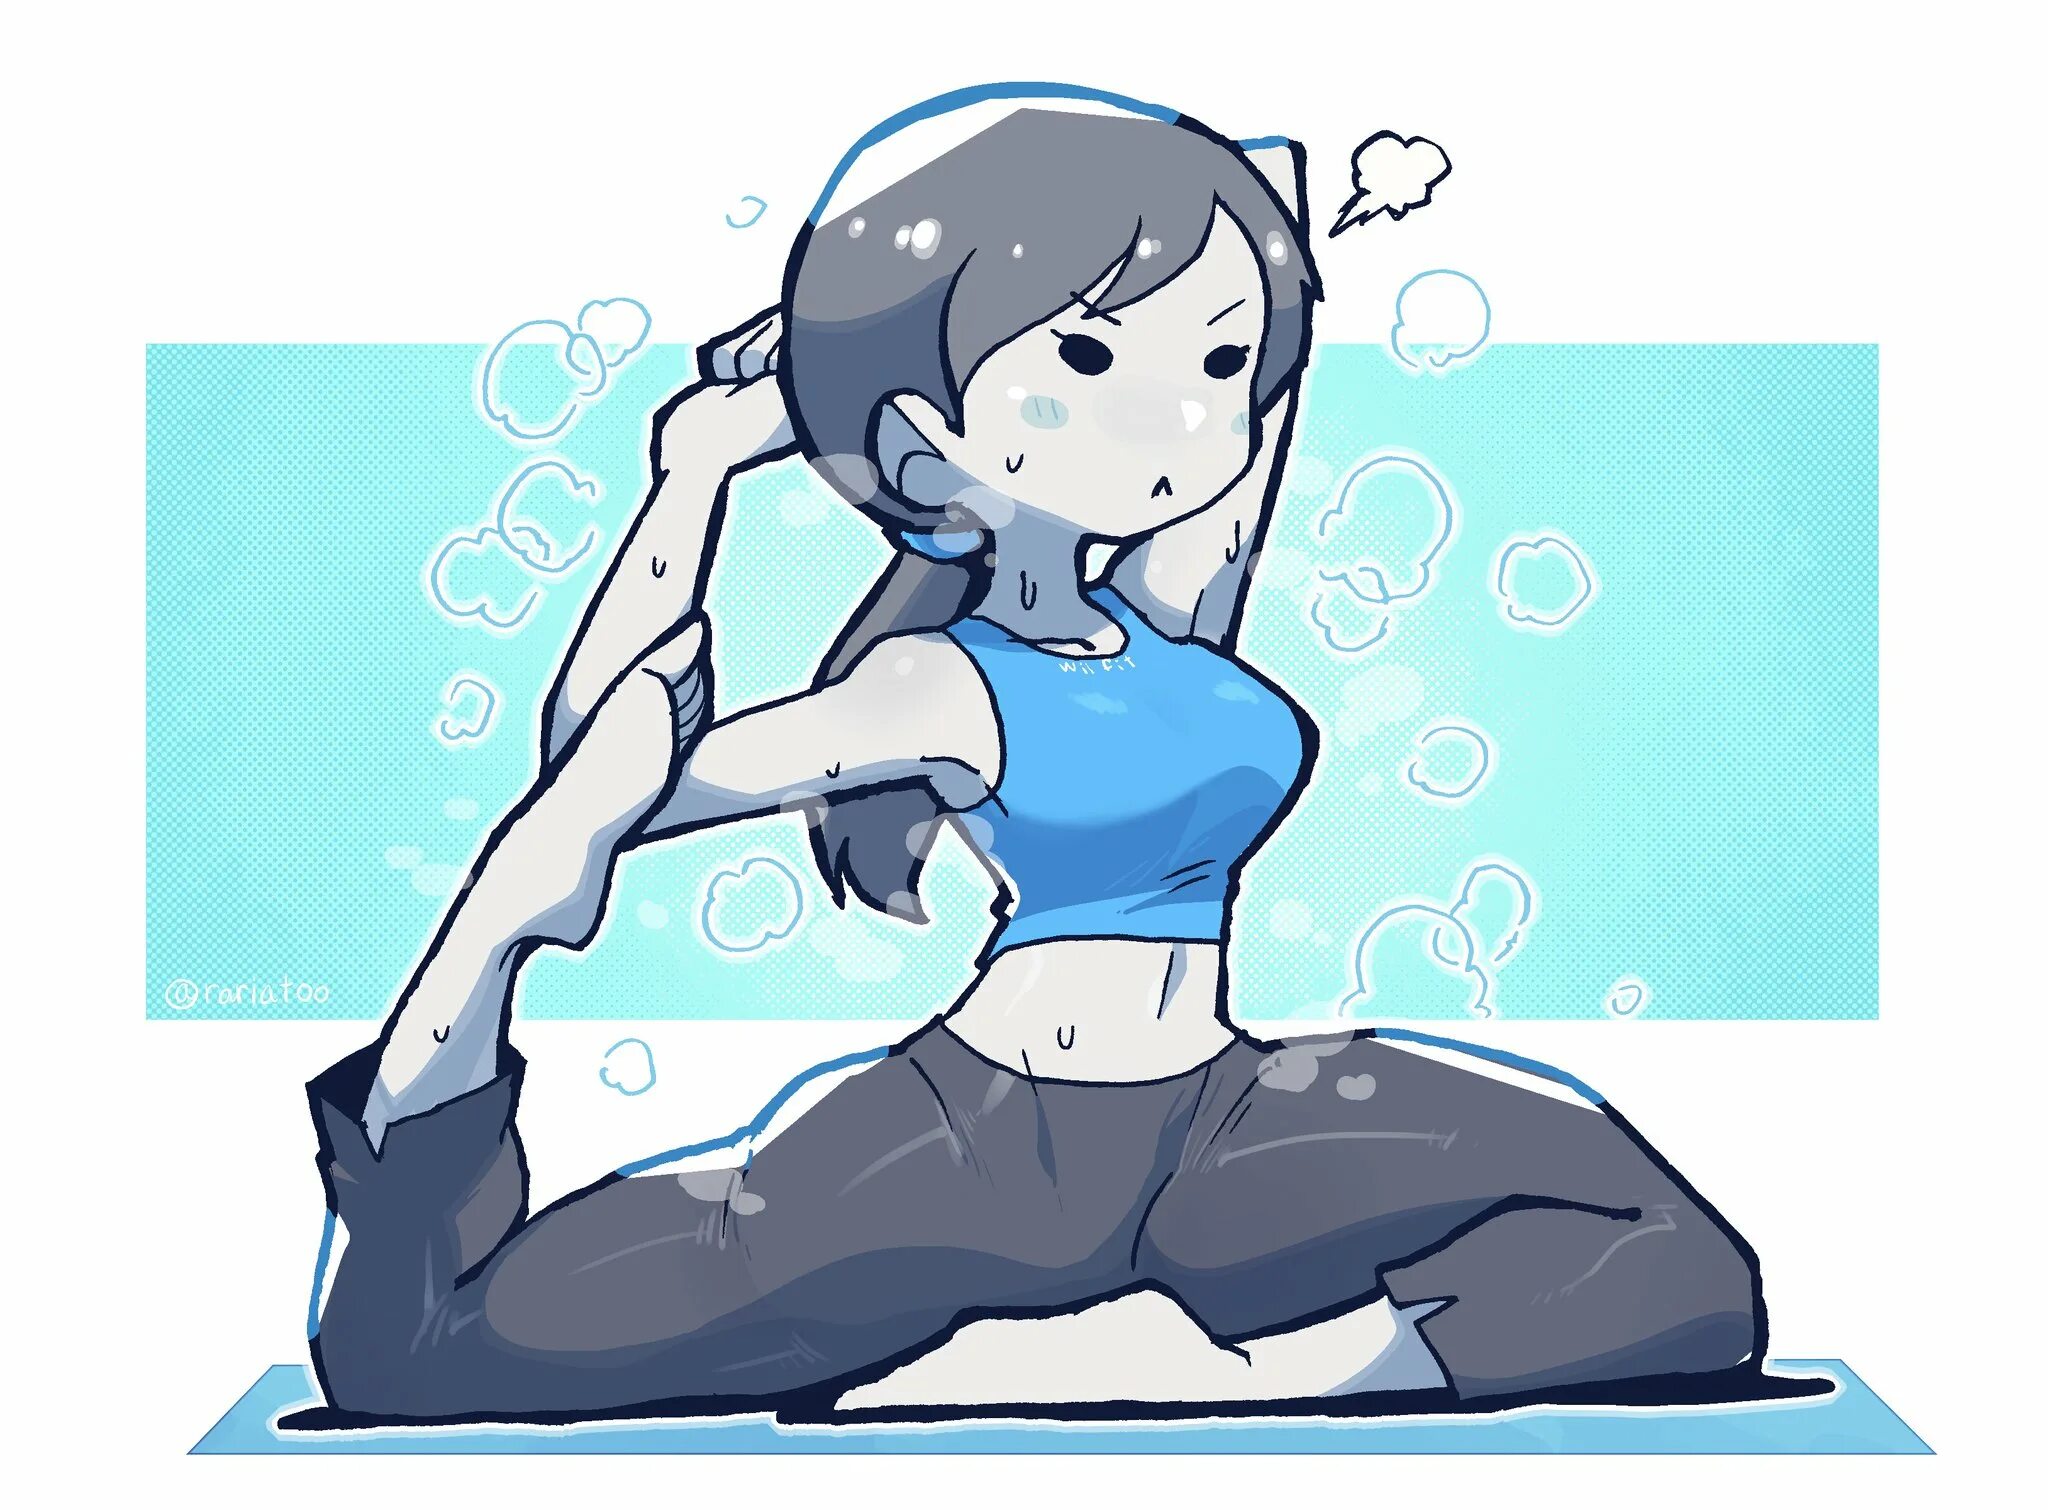 Wii Fit Trainer 34 18. Wii Fit Trainer 18. Wii Fit Trainer 34 giant. Тренер Wii Fit Art.